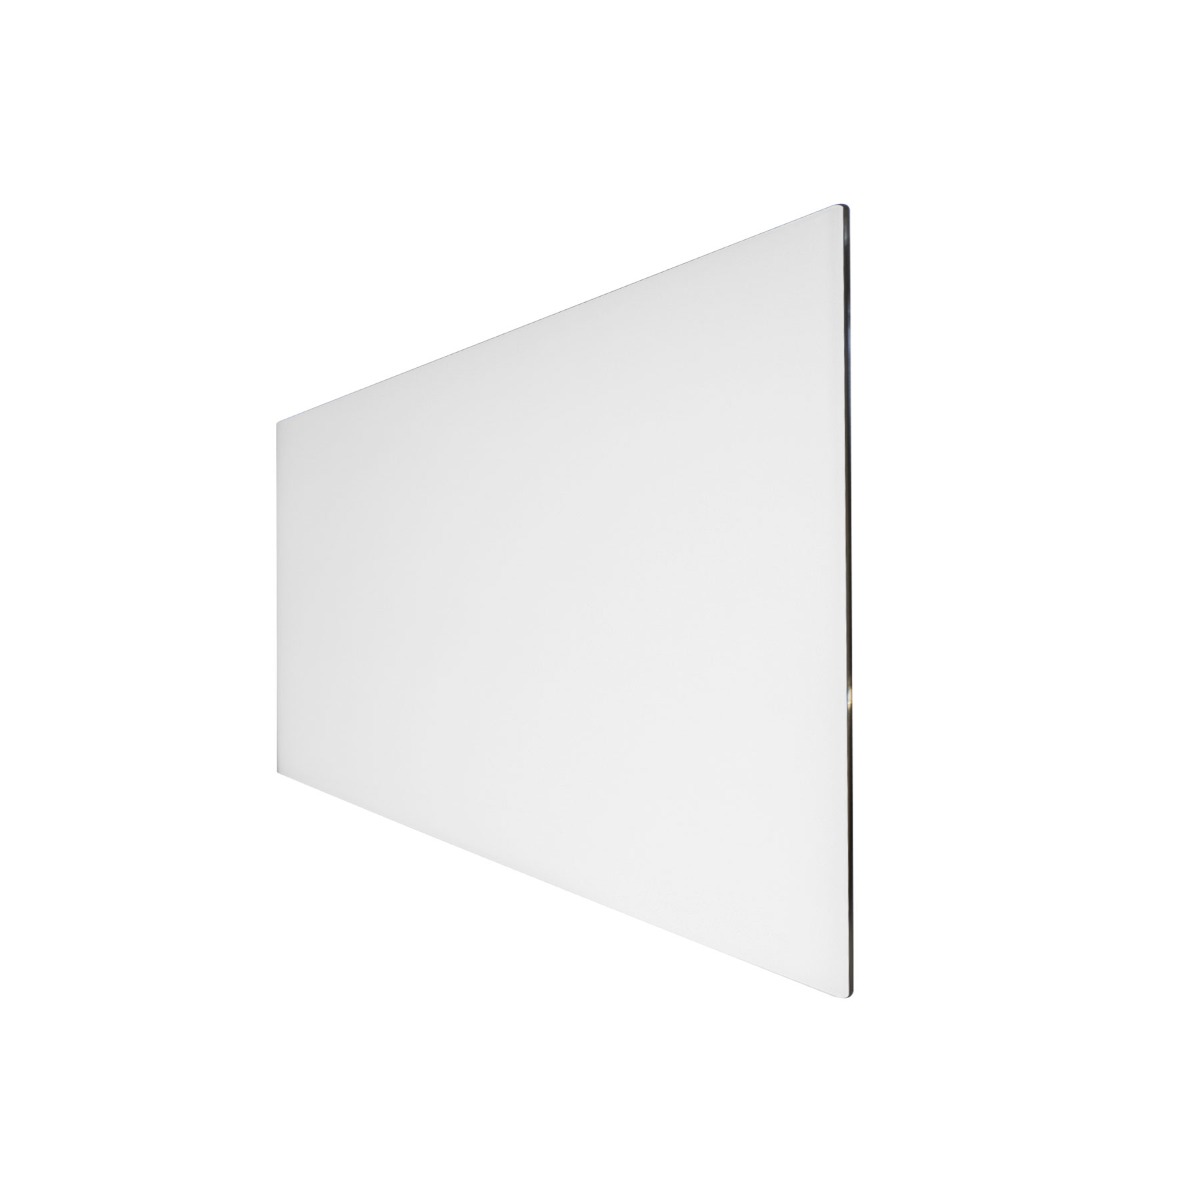 Technotherm ISP Design Glass Infrared Heating Panel - White 350w (1050 x 454mm)